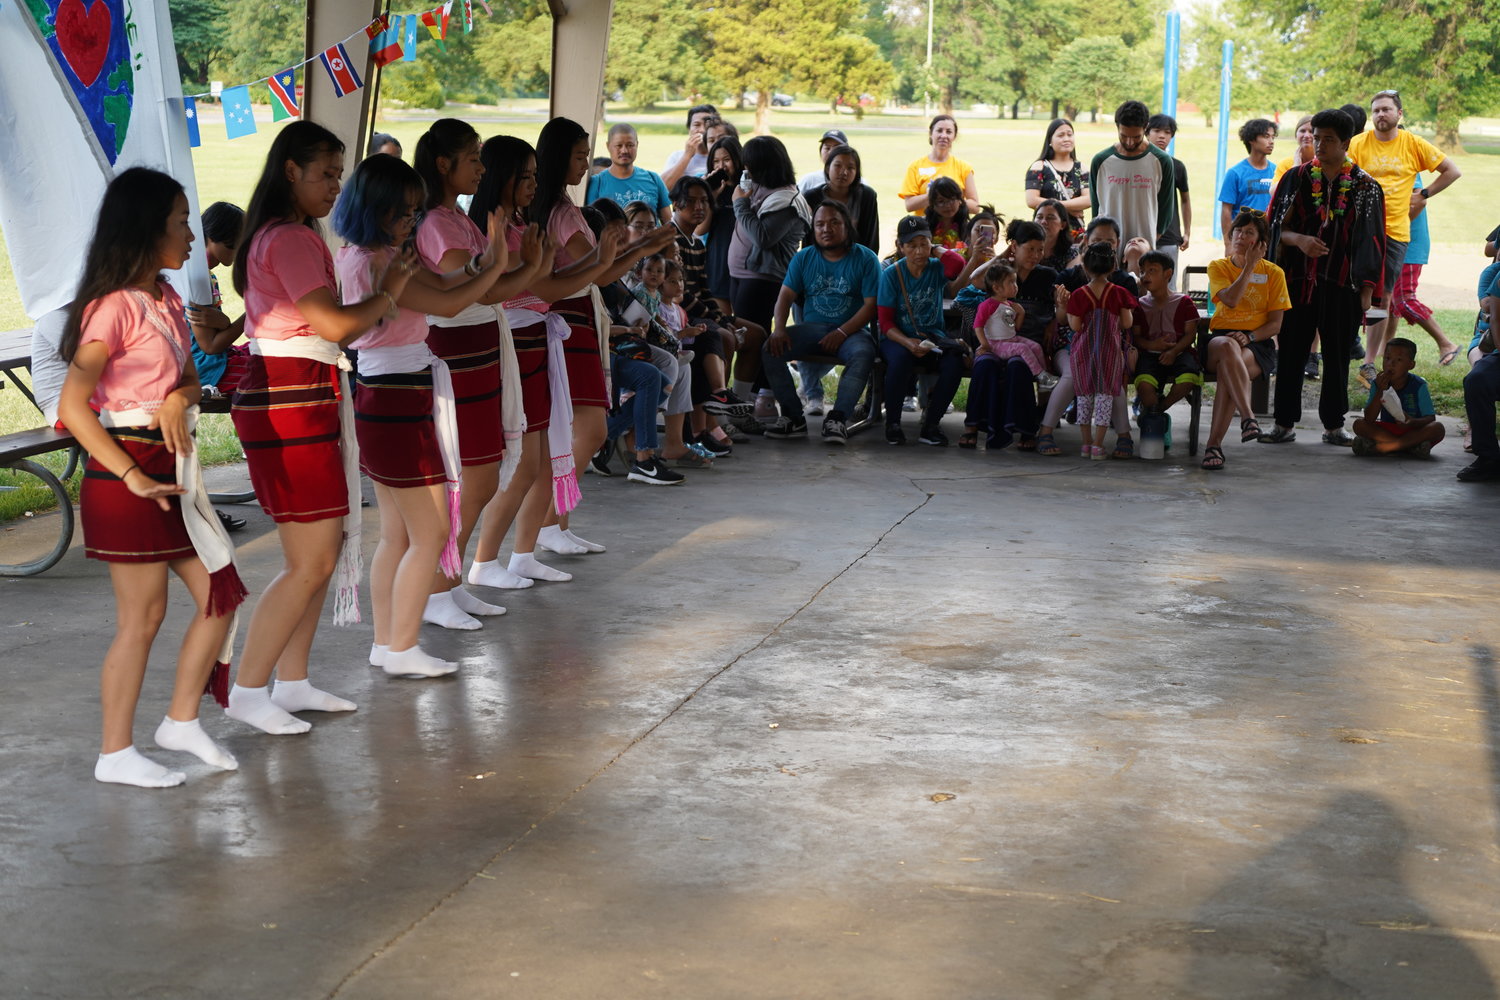 Children from the KM Mother Group give a dance performance during the World Refugee Day celebration in Columbia.